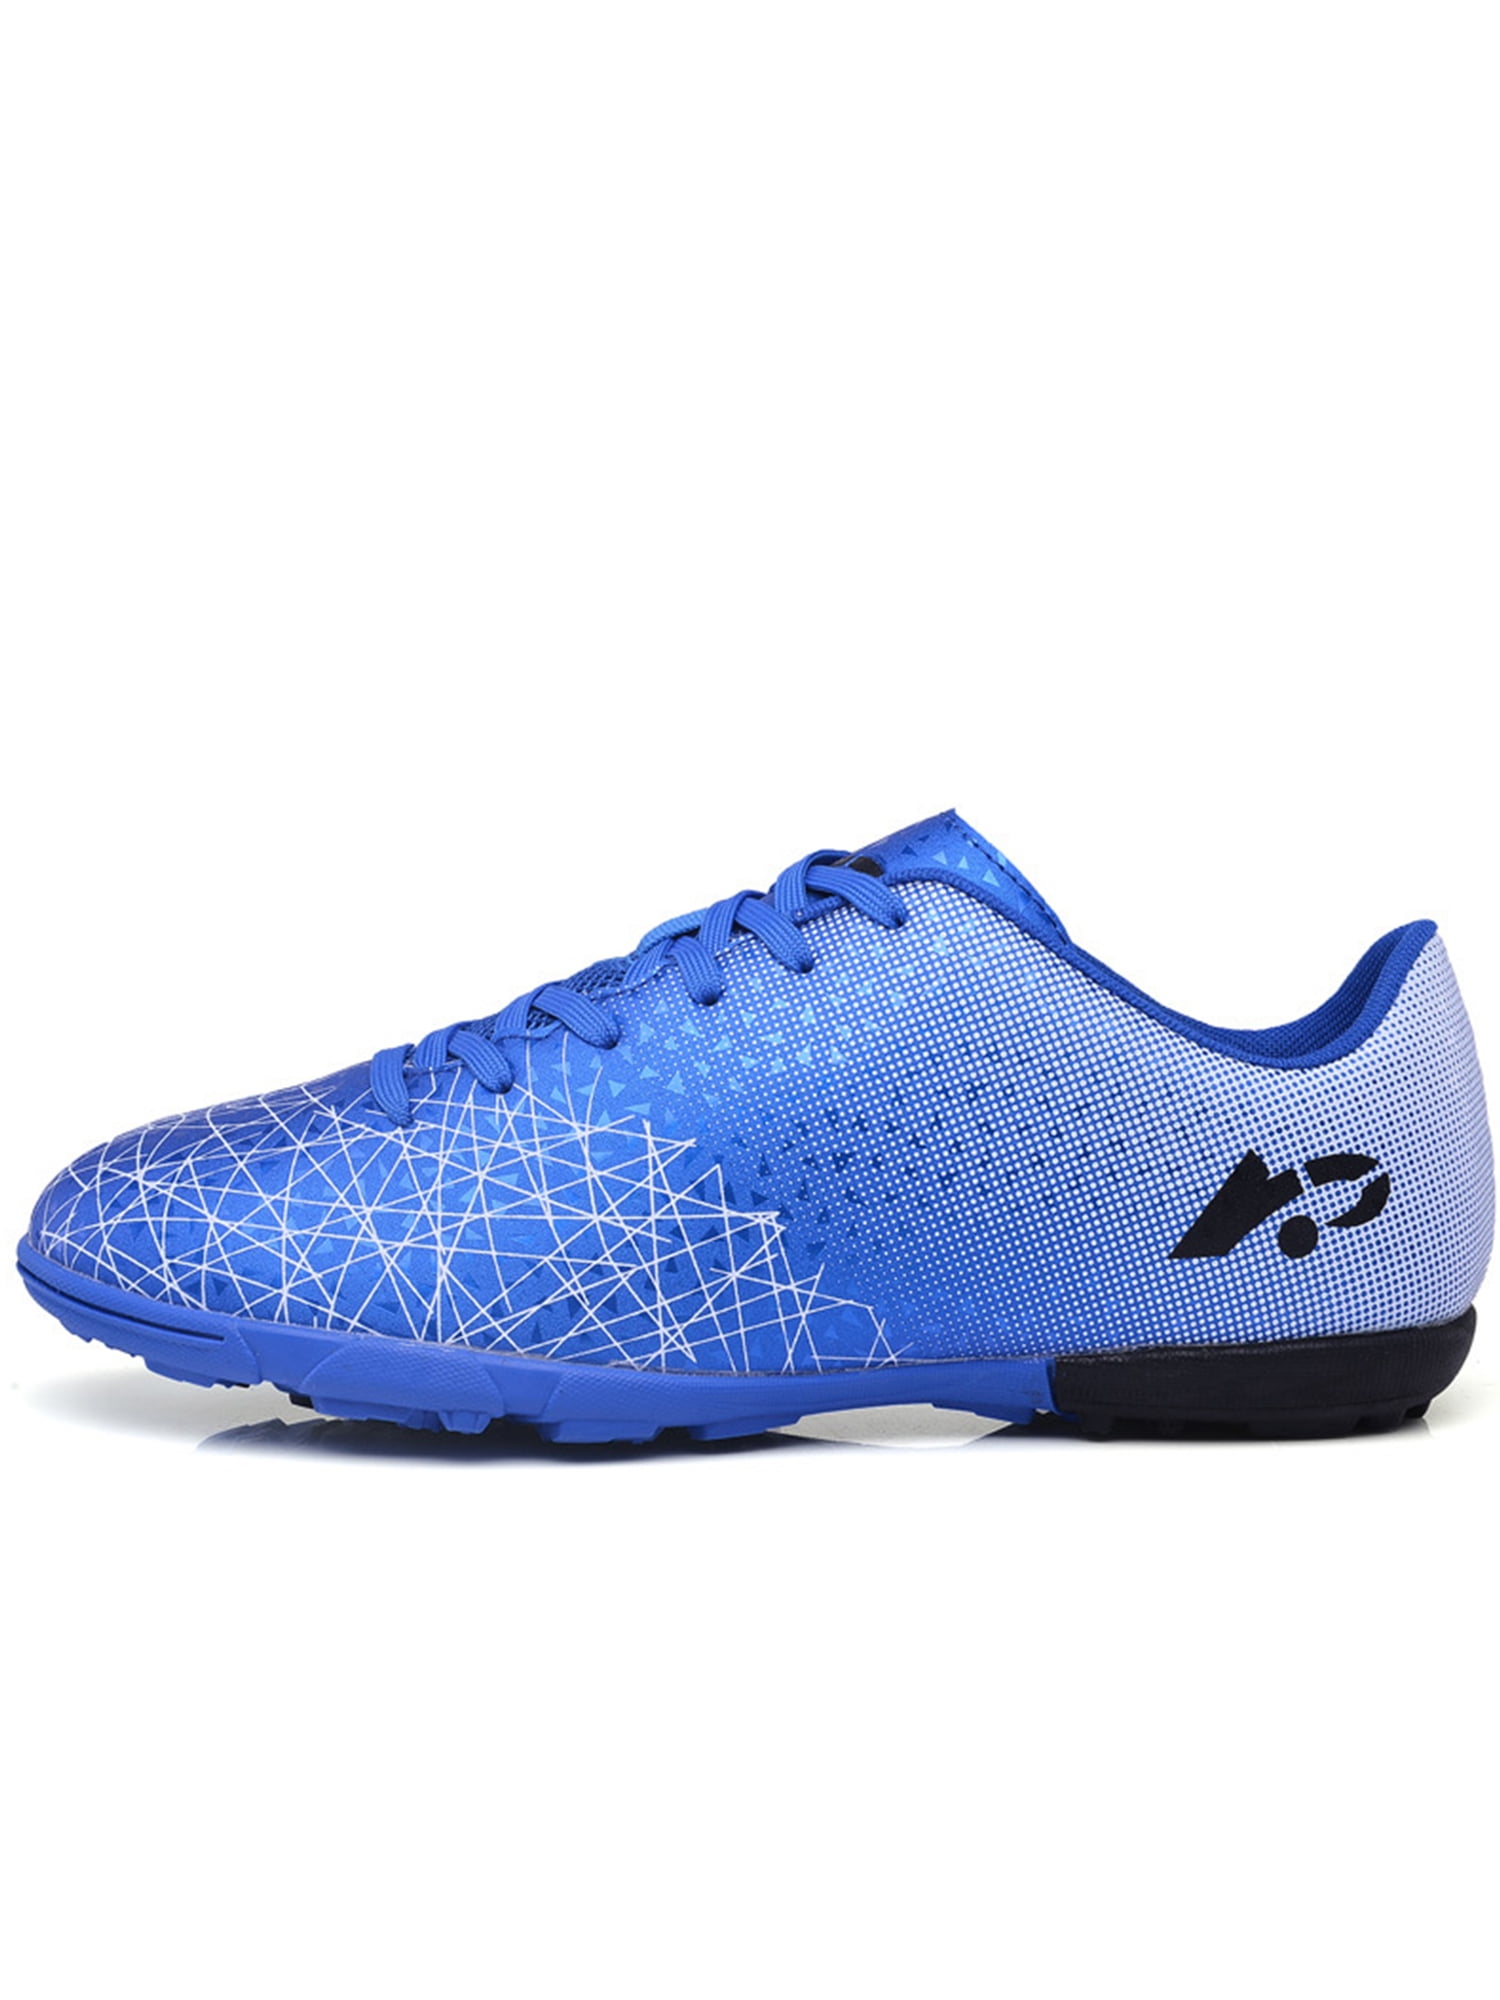 Men's Soccer Shoes Soccer Cleats Fashion Outdoor Trainer Boots Football Sneakers 